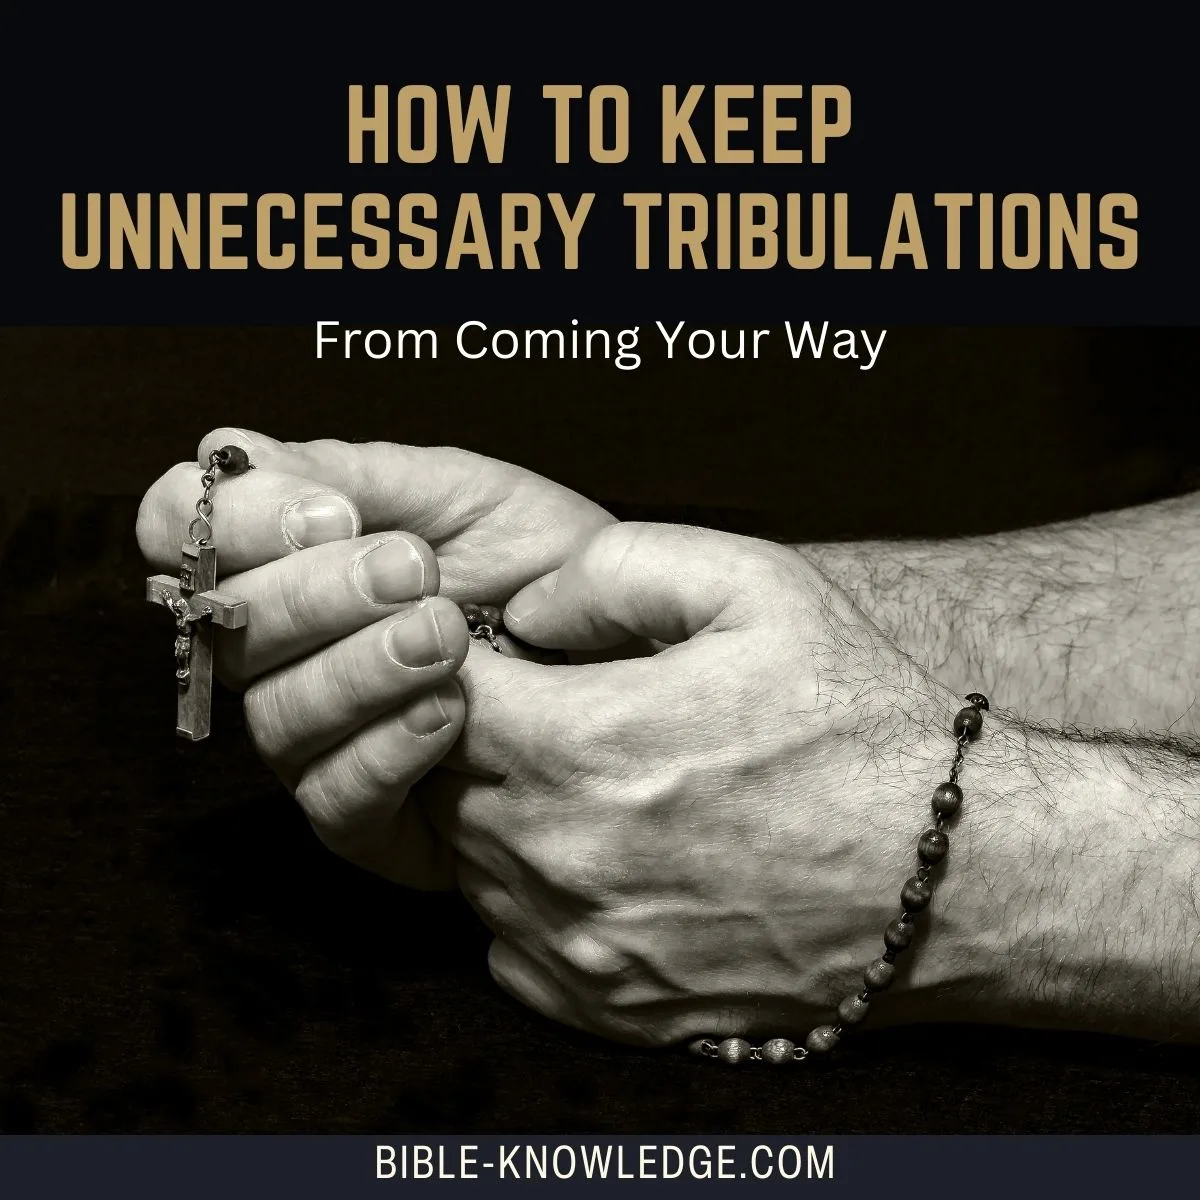 How To Keep Unnecessary Tribulations From Coming Your Way